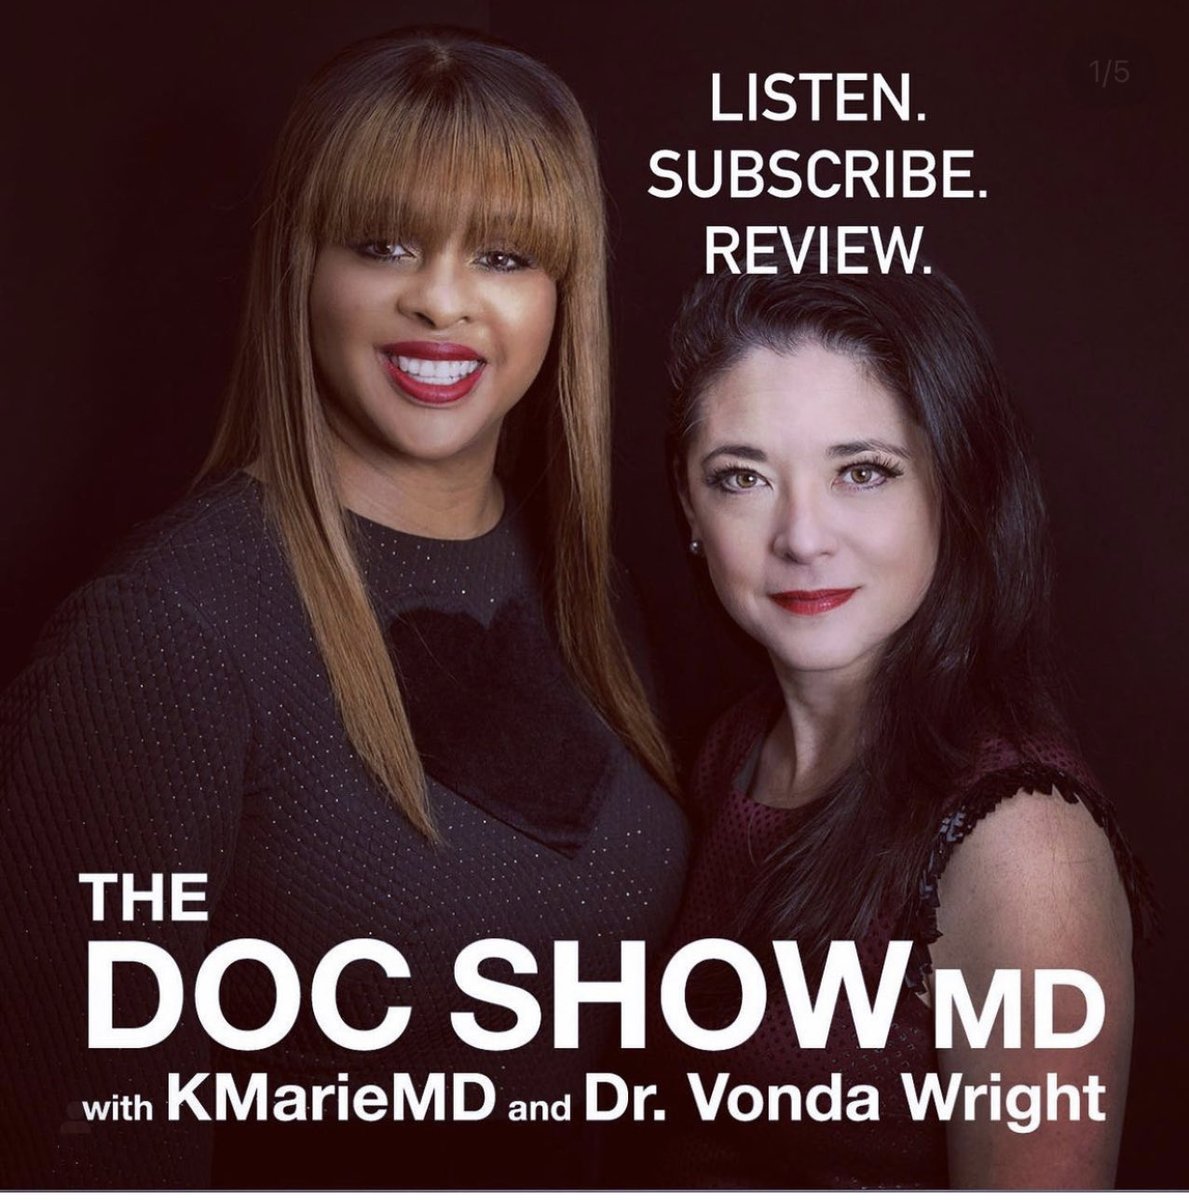 #academicsurgery please support our new #podcast on #leadership #culture and #surgery. ⁦@DrVondaWright⁩ and I have #smart conversations on the bleeding edge of #science #healthcare and culture. Out now on all podcast platforms.